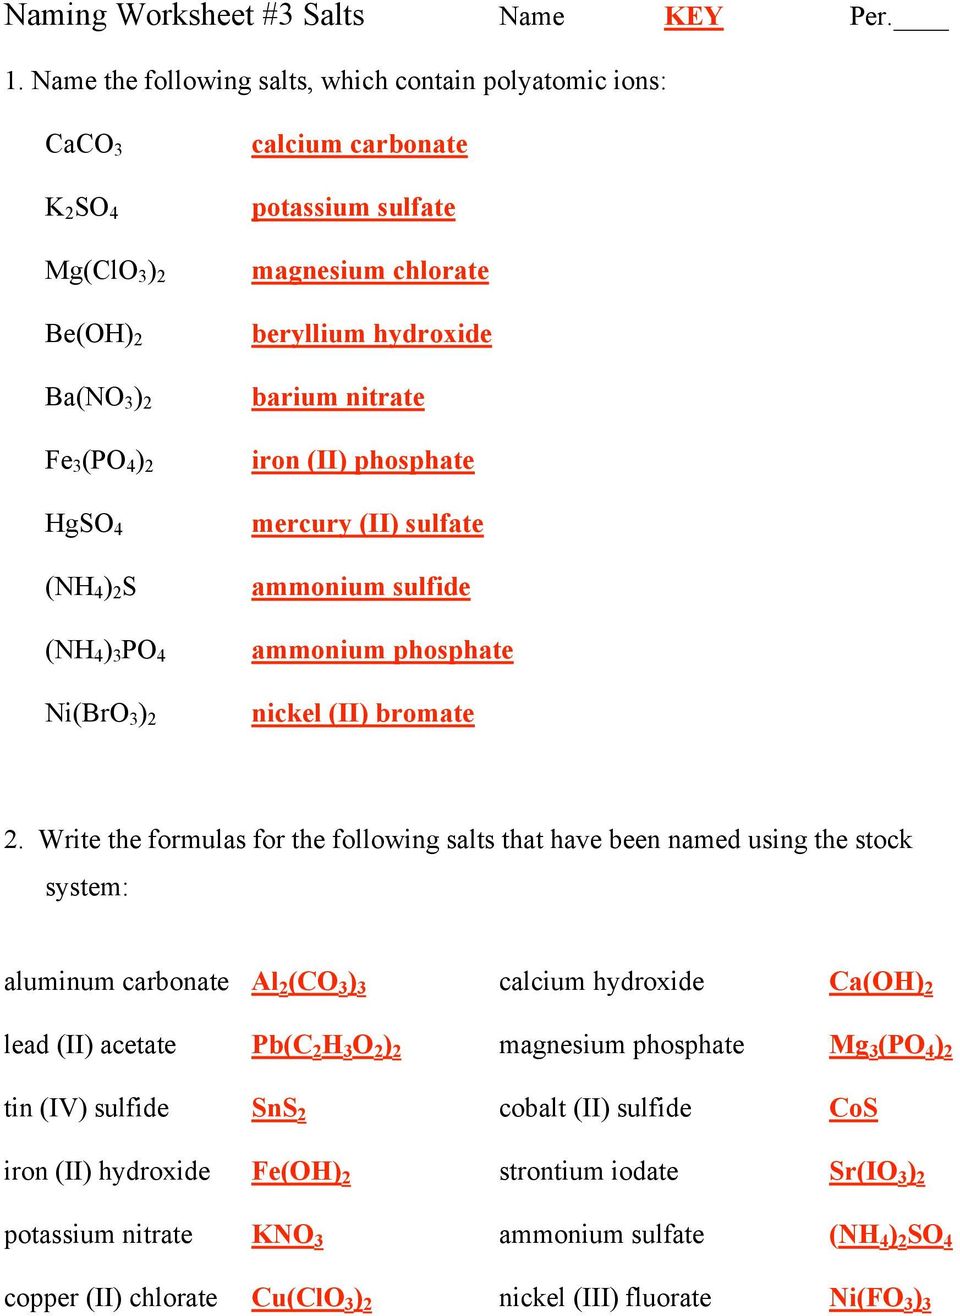 Chemistry Ionic Compounds Polyatomic Ions Worksheet Answers Free